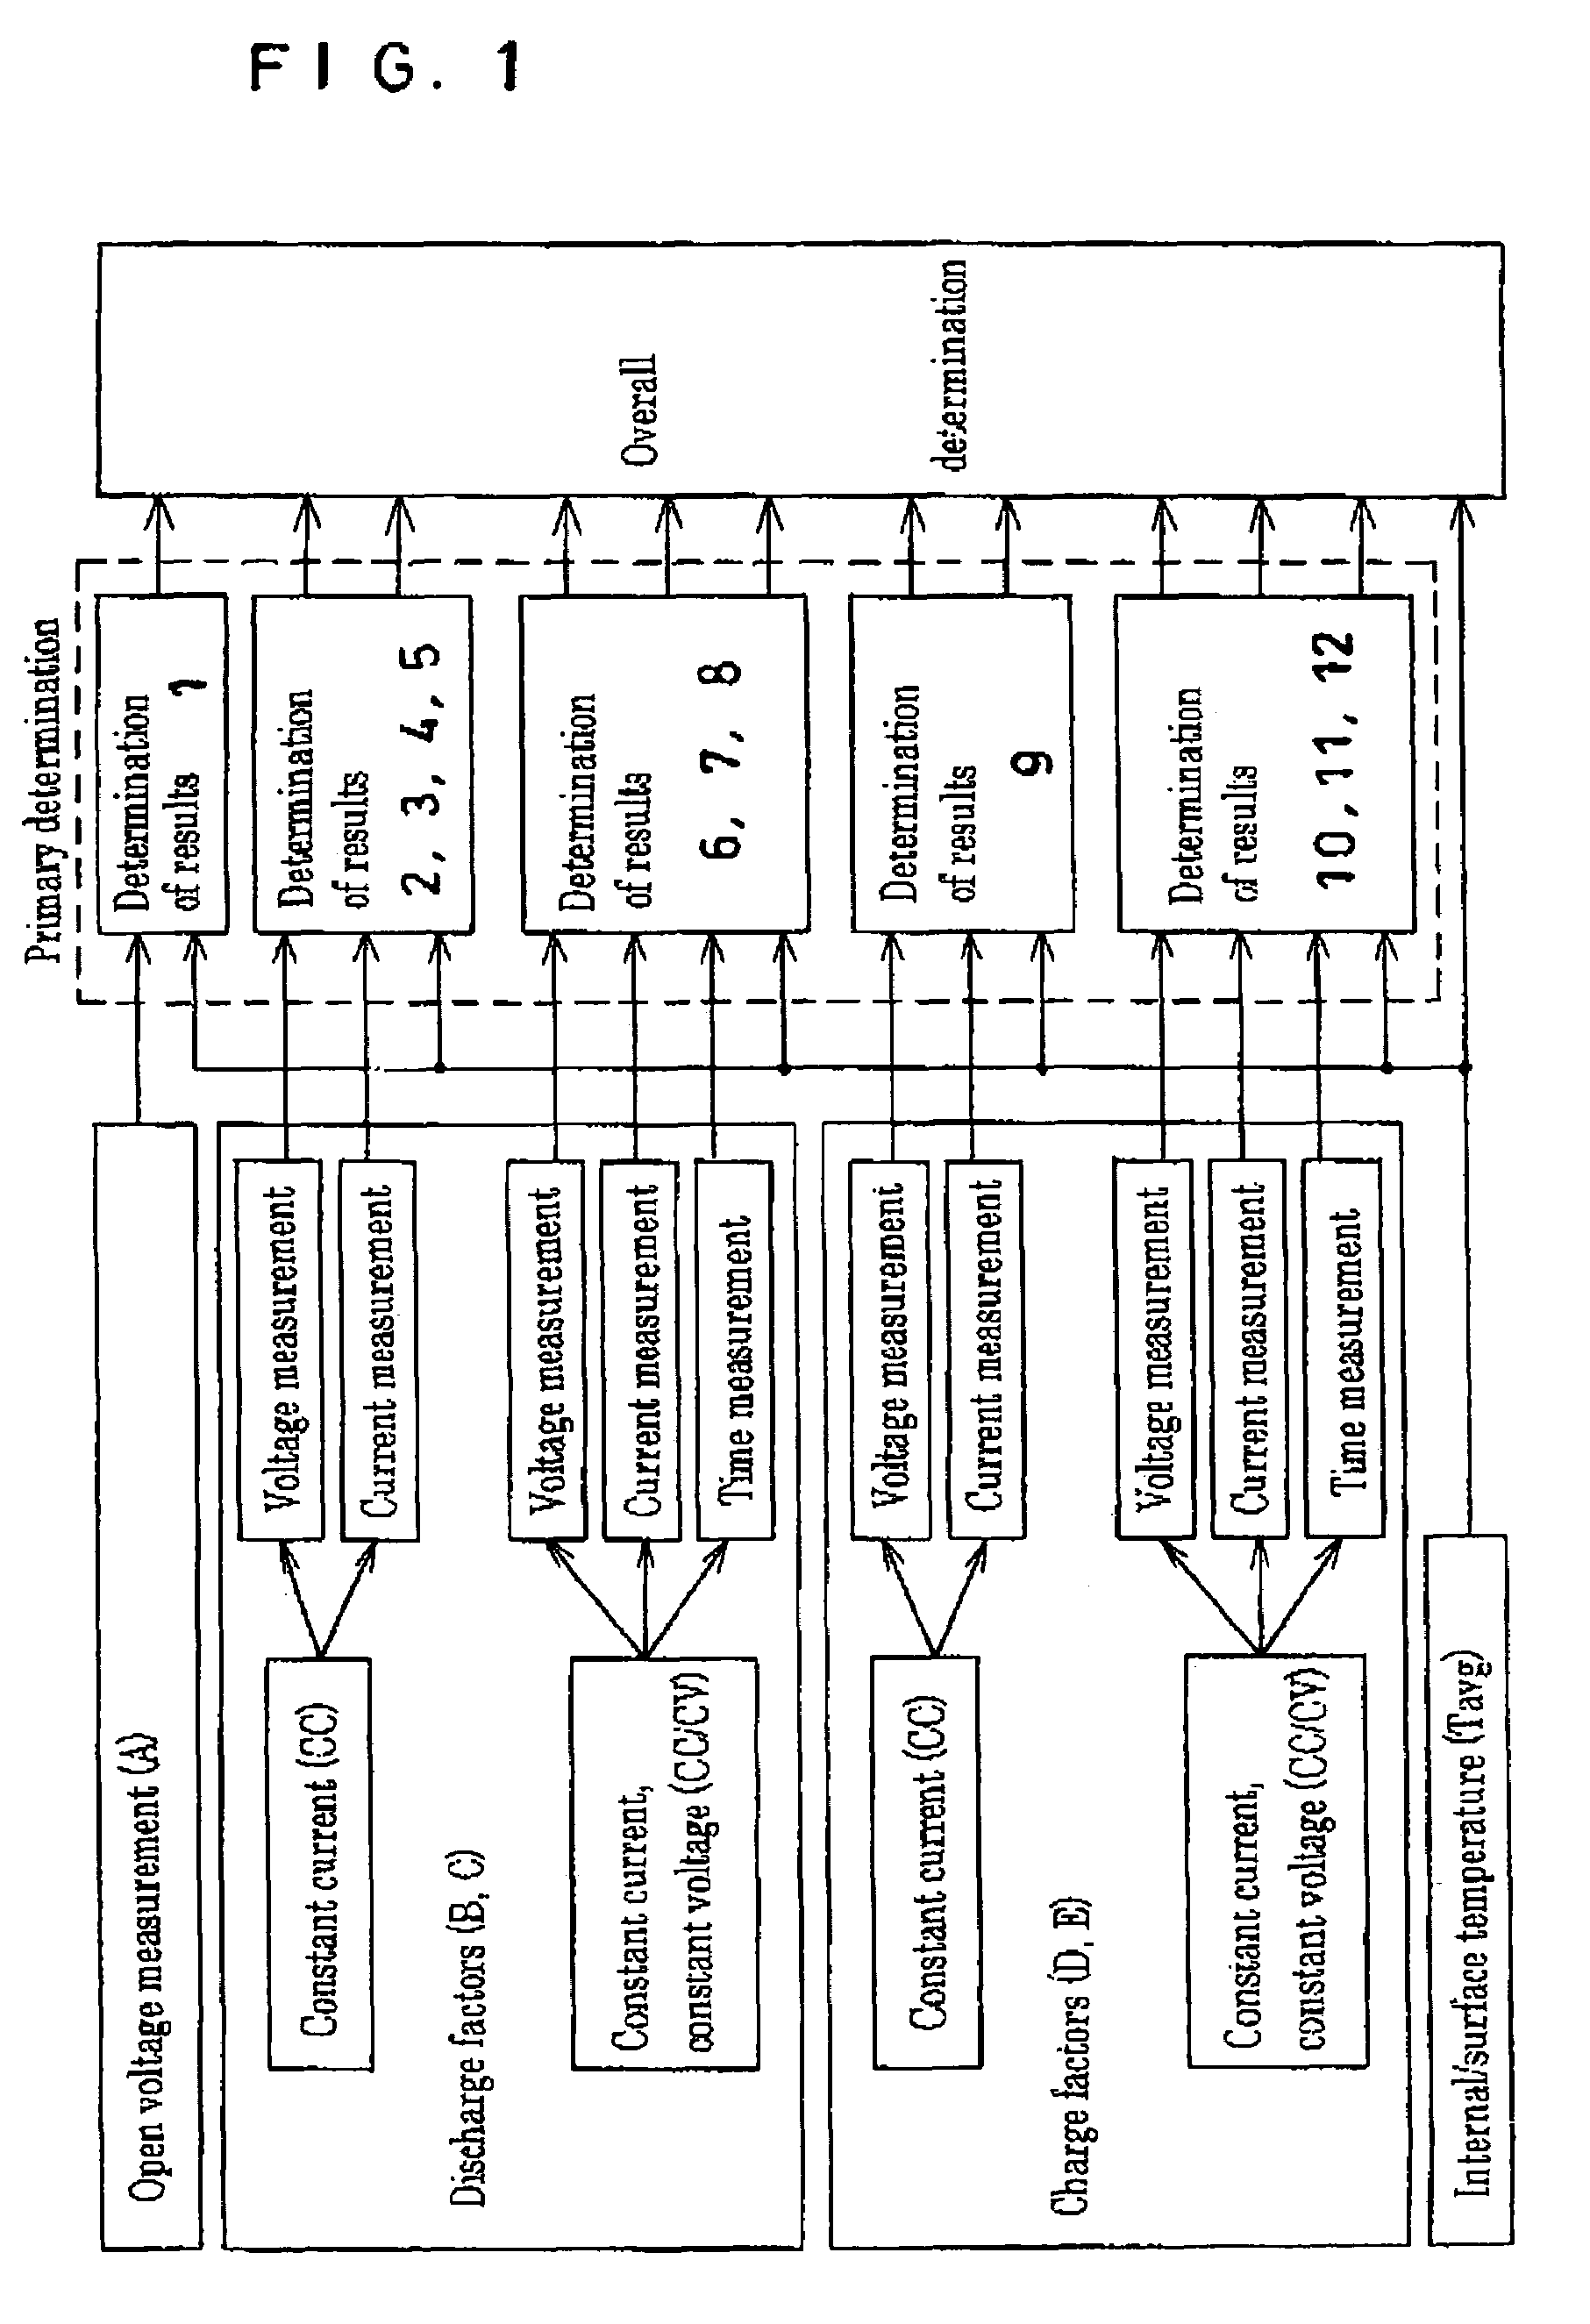 Method and apparatus for confirming the charge amount and degradation state of a battery, a storage medium, an information processing apparatus, and an electronic apparatus